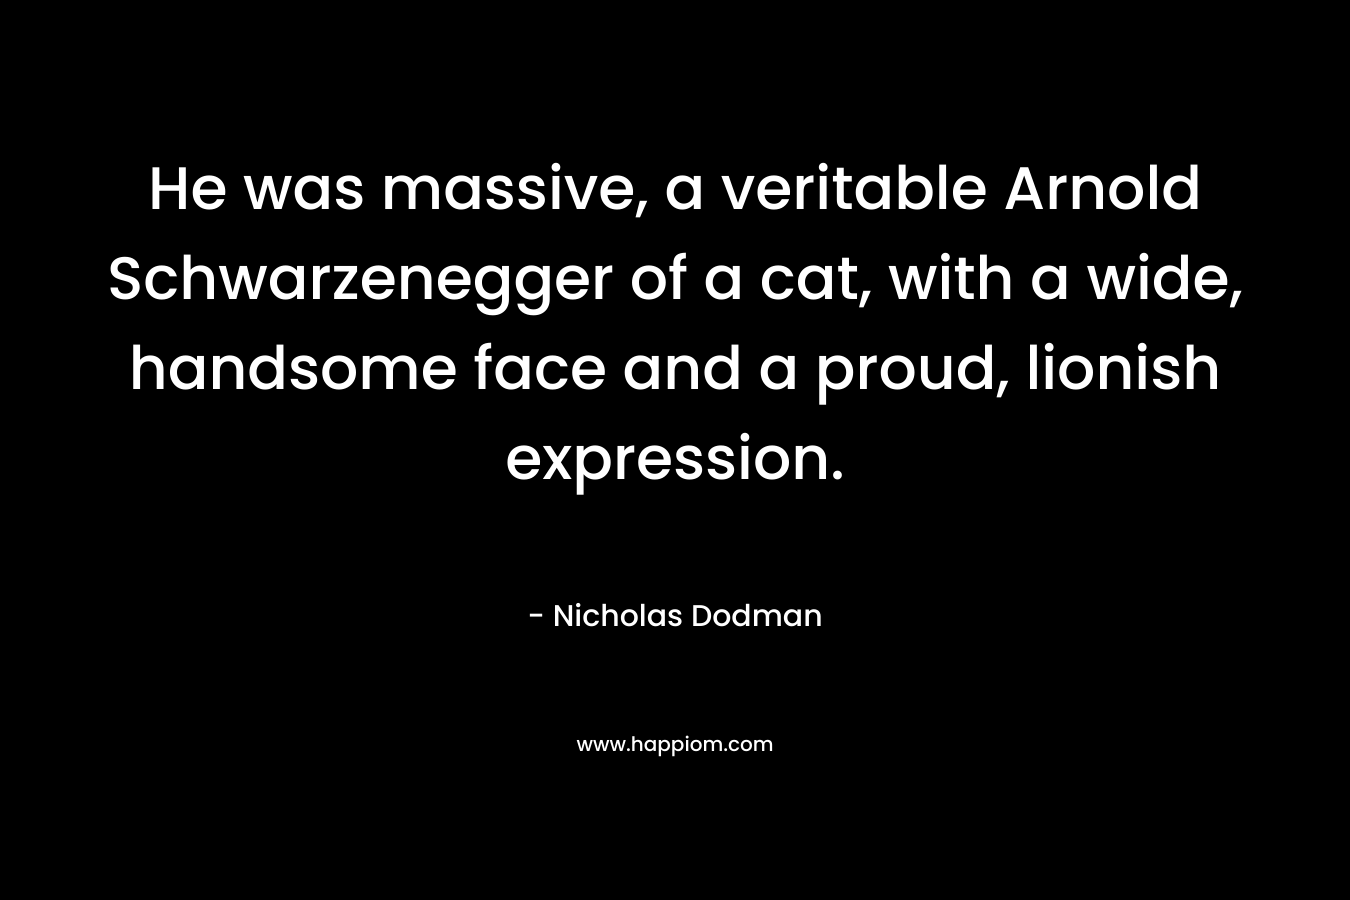 He was massive, a veritable Arnold Schwarzenegger of a cat, with a wide, handsome face and a proud, lionish expression. – Nicholas Dodman